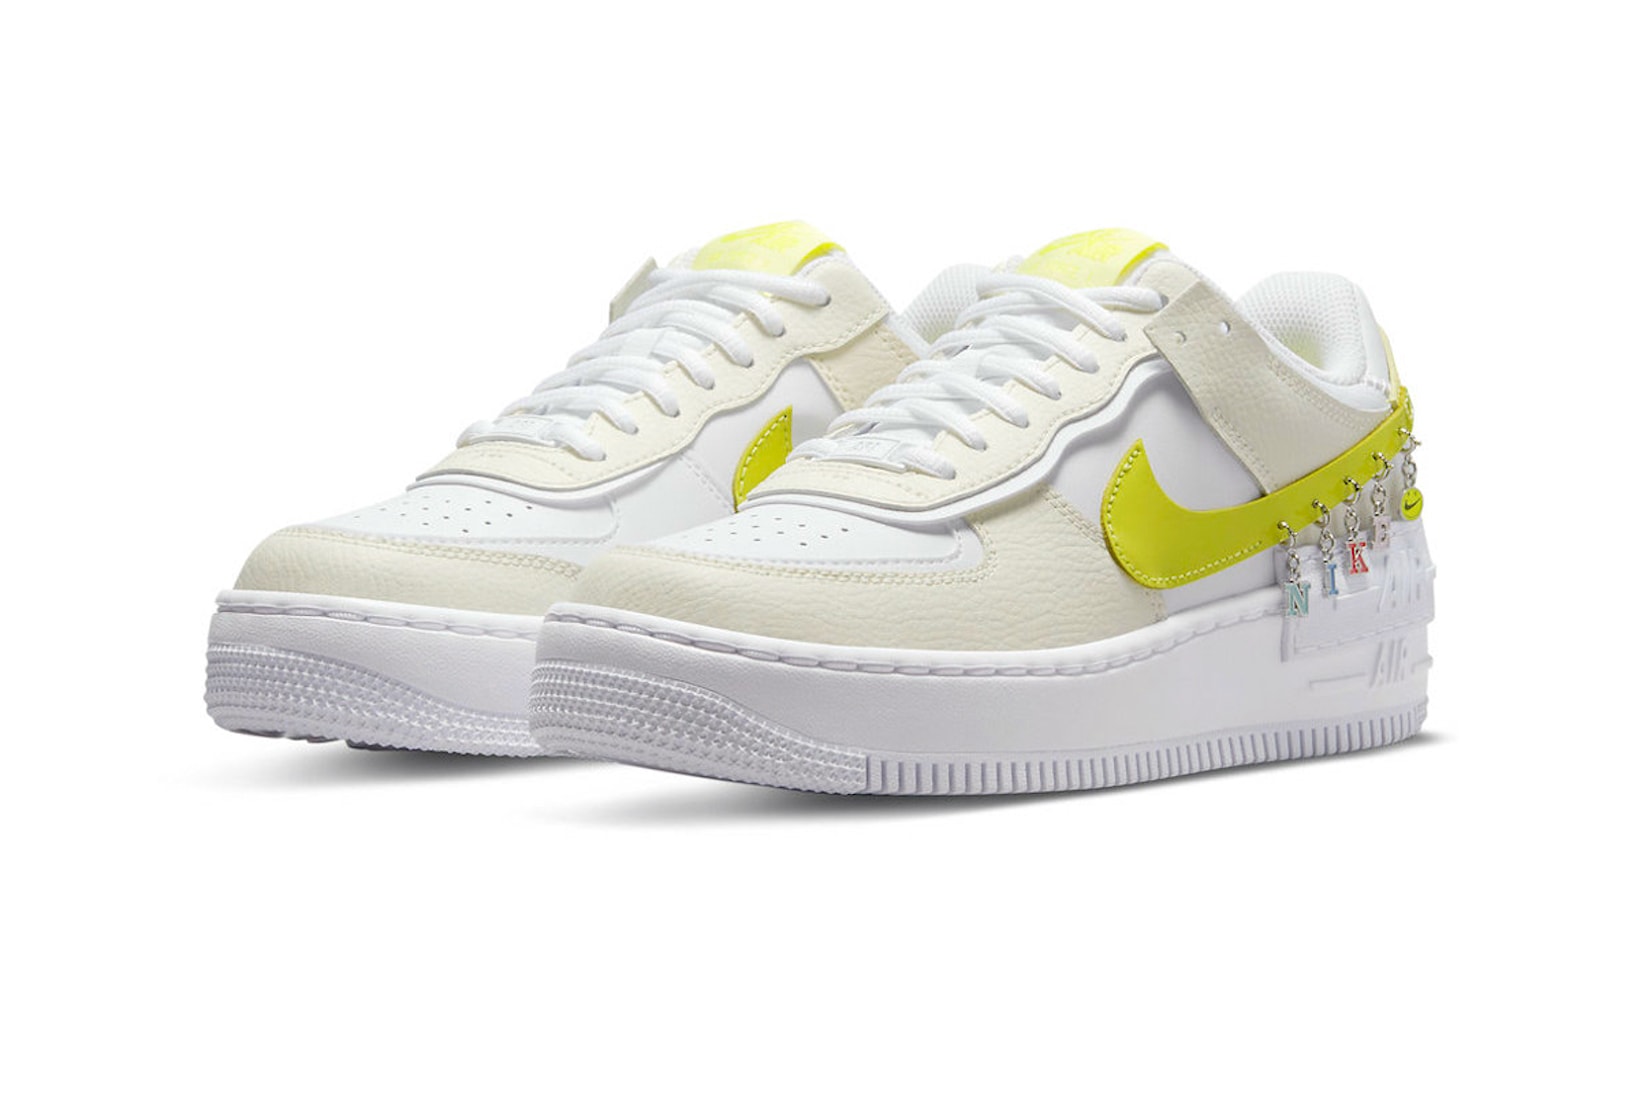 nike air force 1 shadow af1 womens sneakers have a day white yellow anklet charms footwear sneakerhead kicks shoes lateral